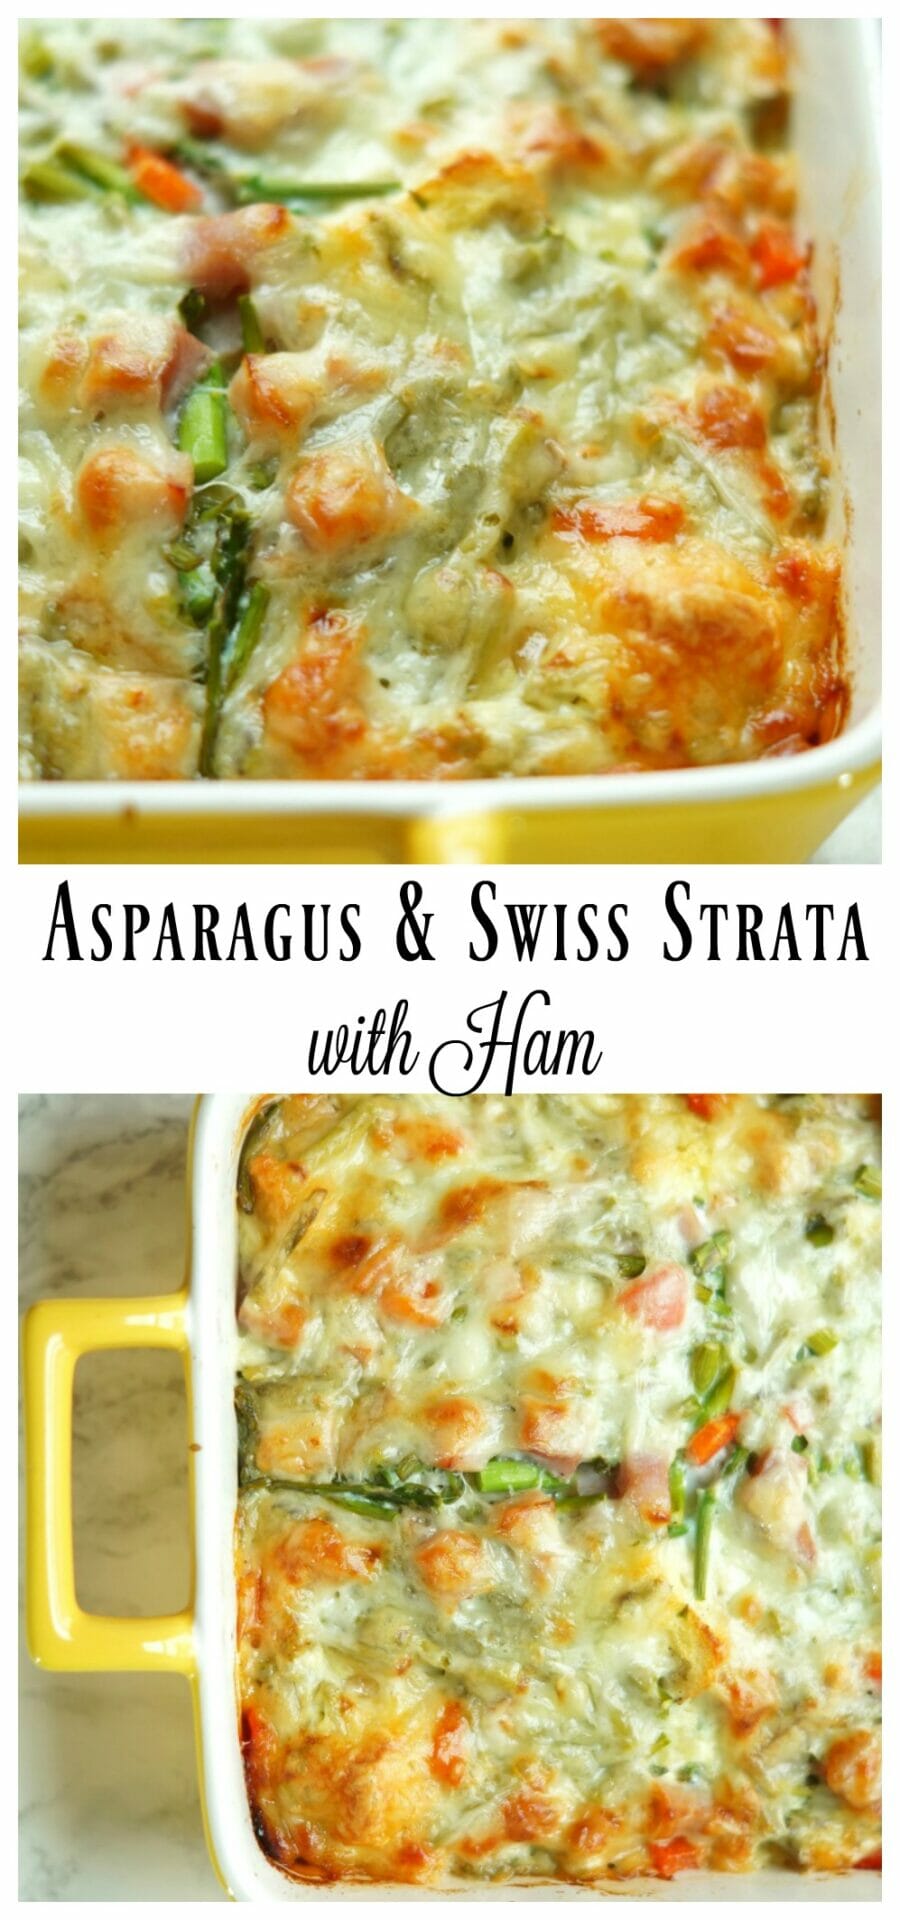 Asparagus and Swiss Strata with Ham is the perfect overnight breakfast casserole for Christmas morning!